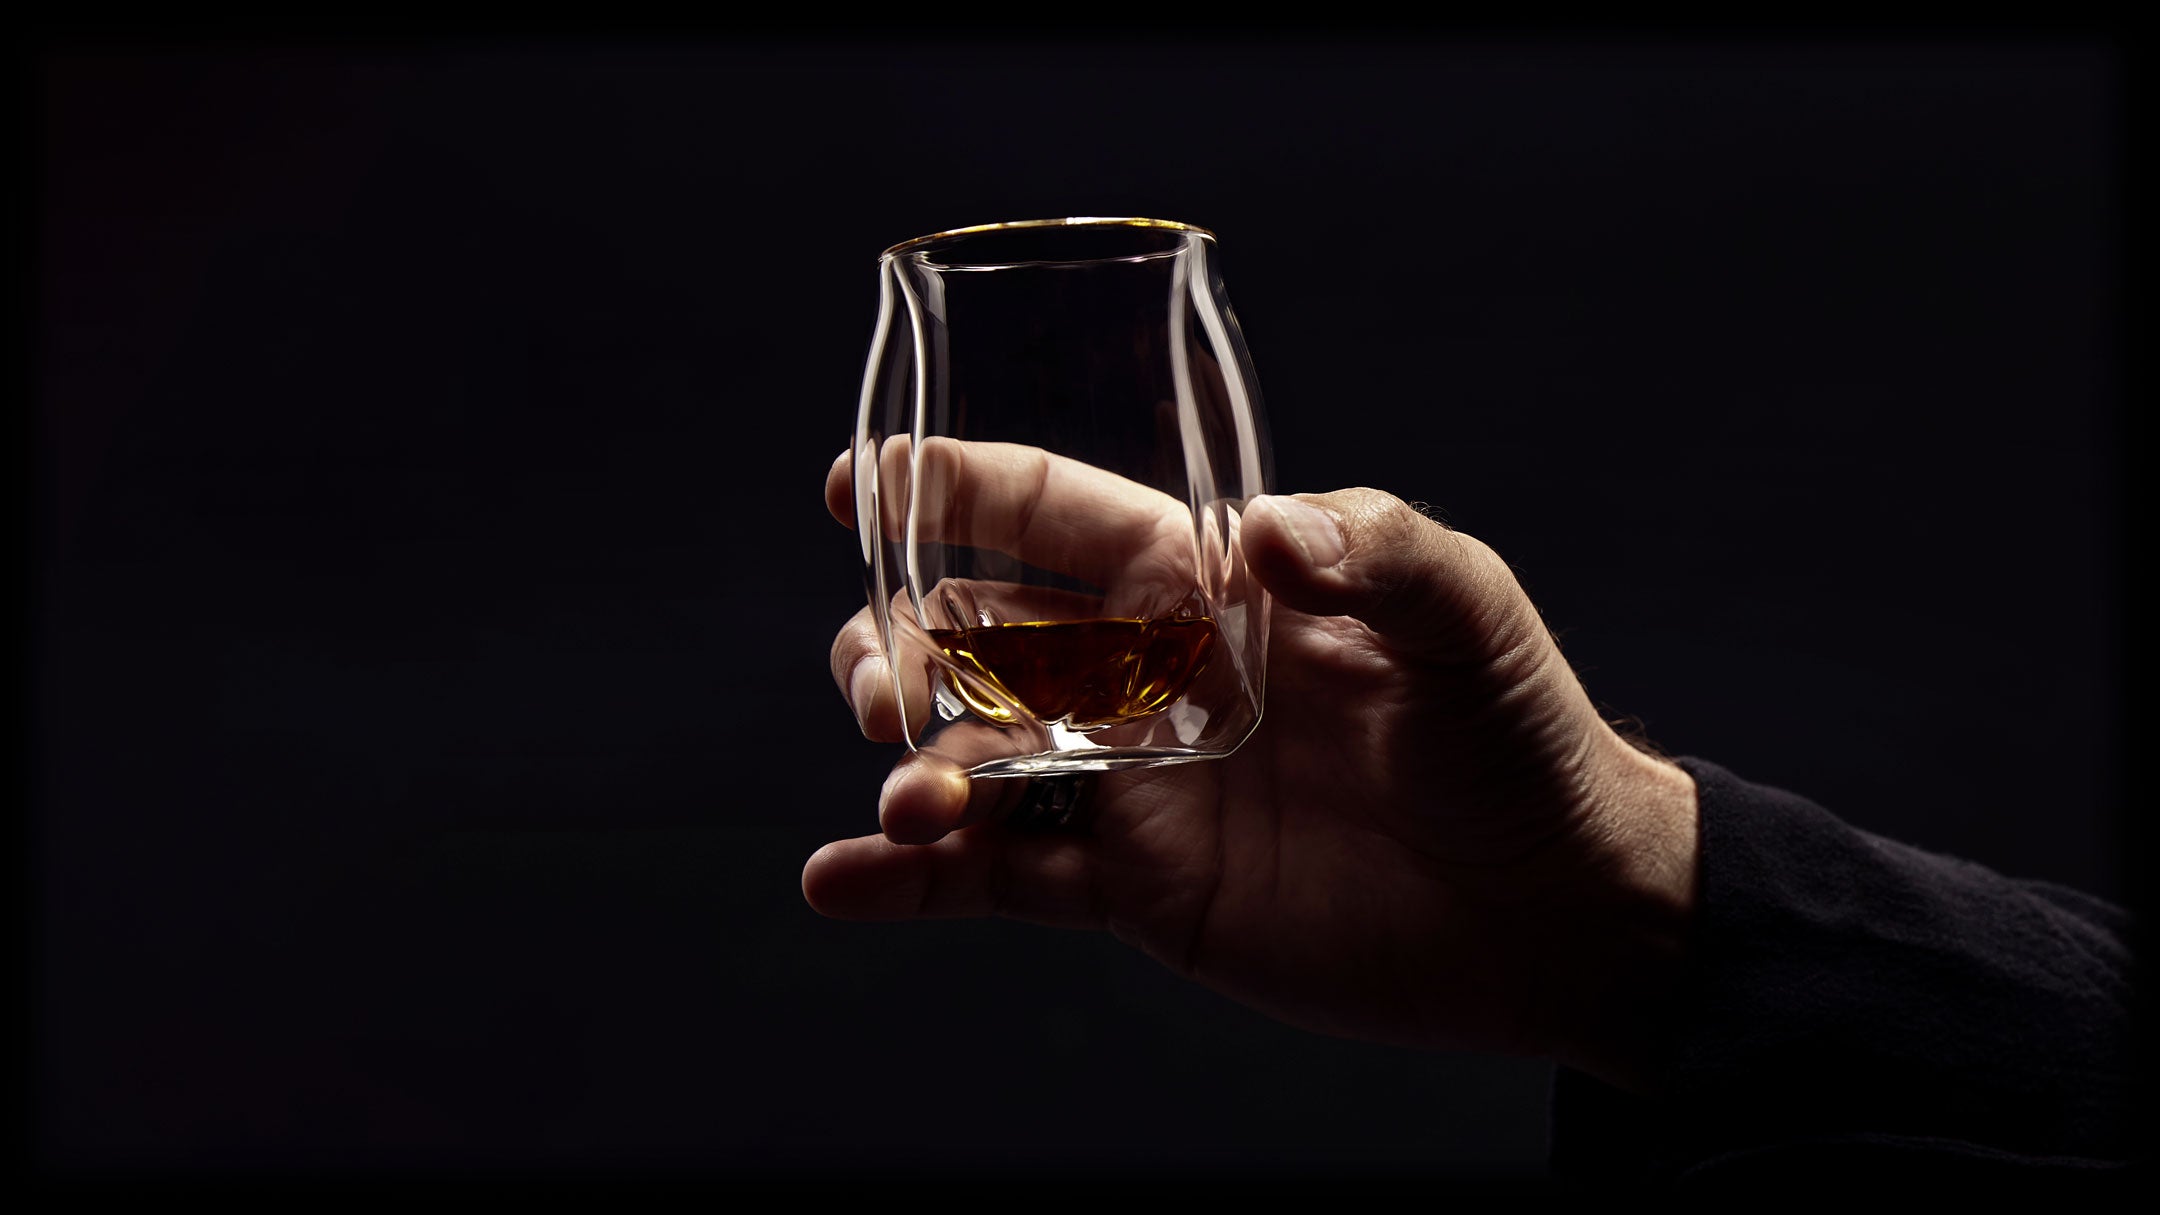 Norlan - Glassware & Accessories for the Whisky Lover